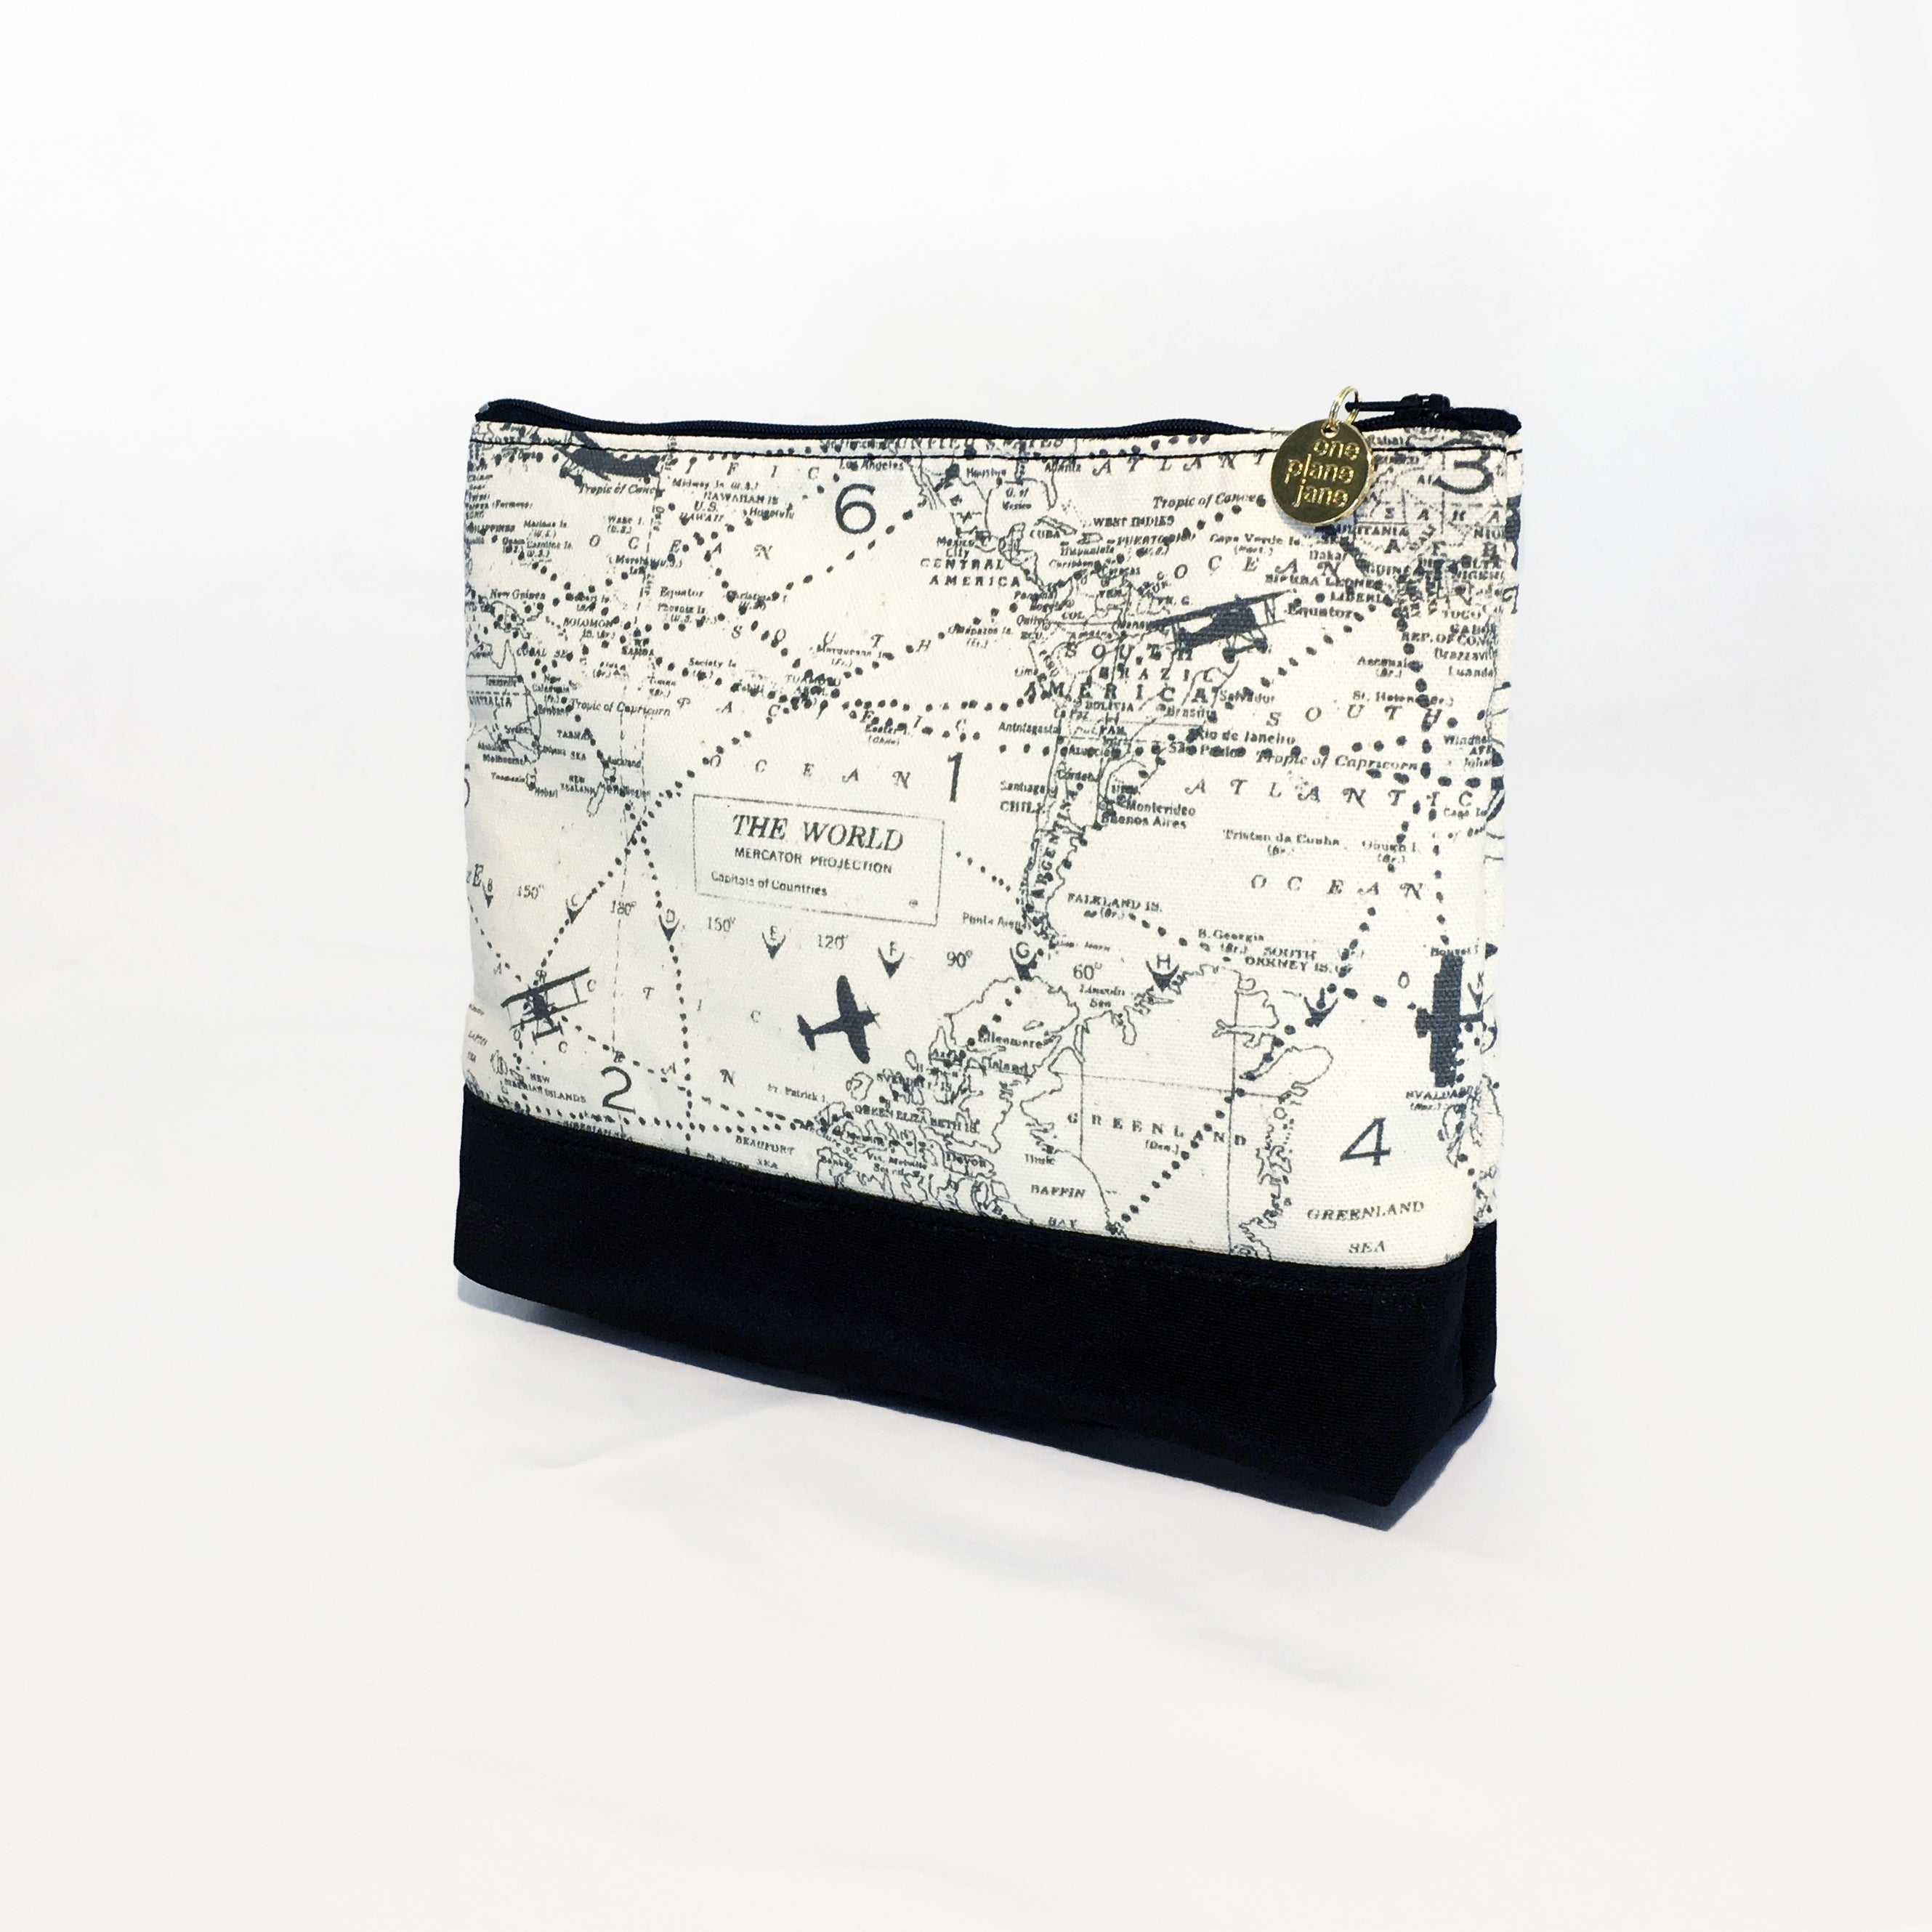 One Plane Jane Airplane Small Cosmetic bag pouch. Cream and black design featuring the world map with airplanes.  Zippered top and One Plane Jane zipper charm.